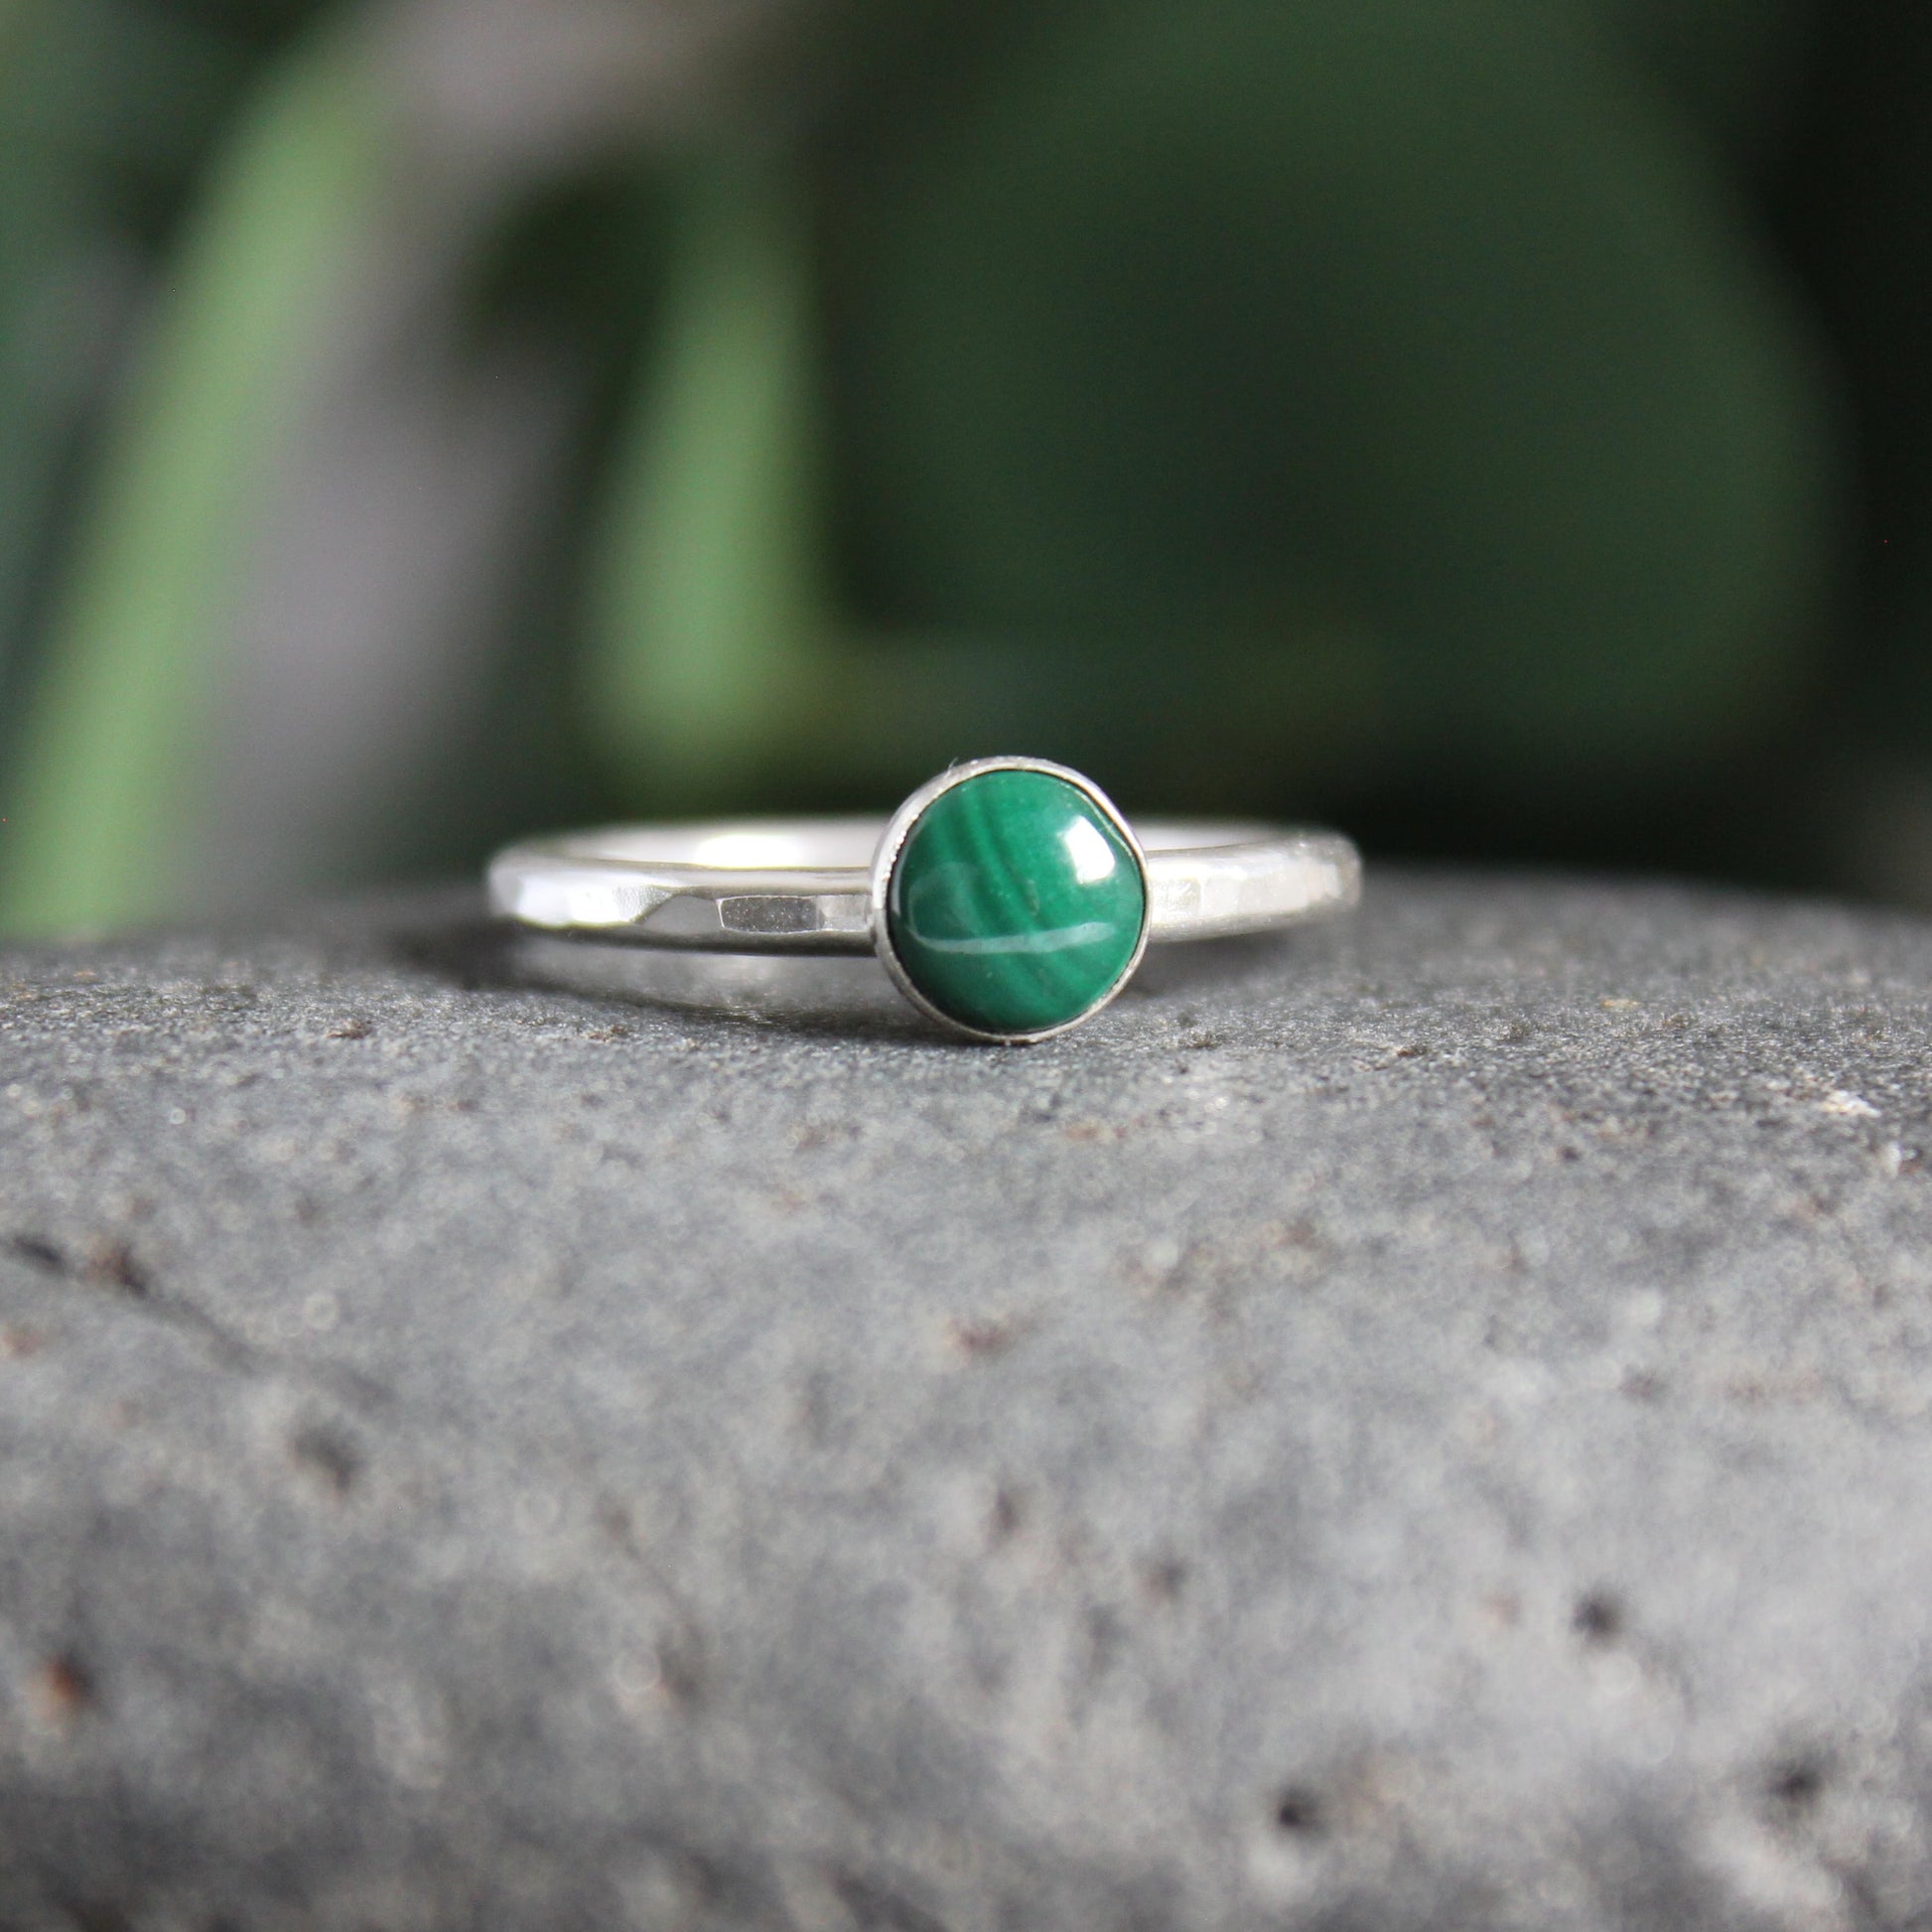 A 6mm round malachite cabochon set in a sterling silver bezel cup on a sturdy silver band. 